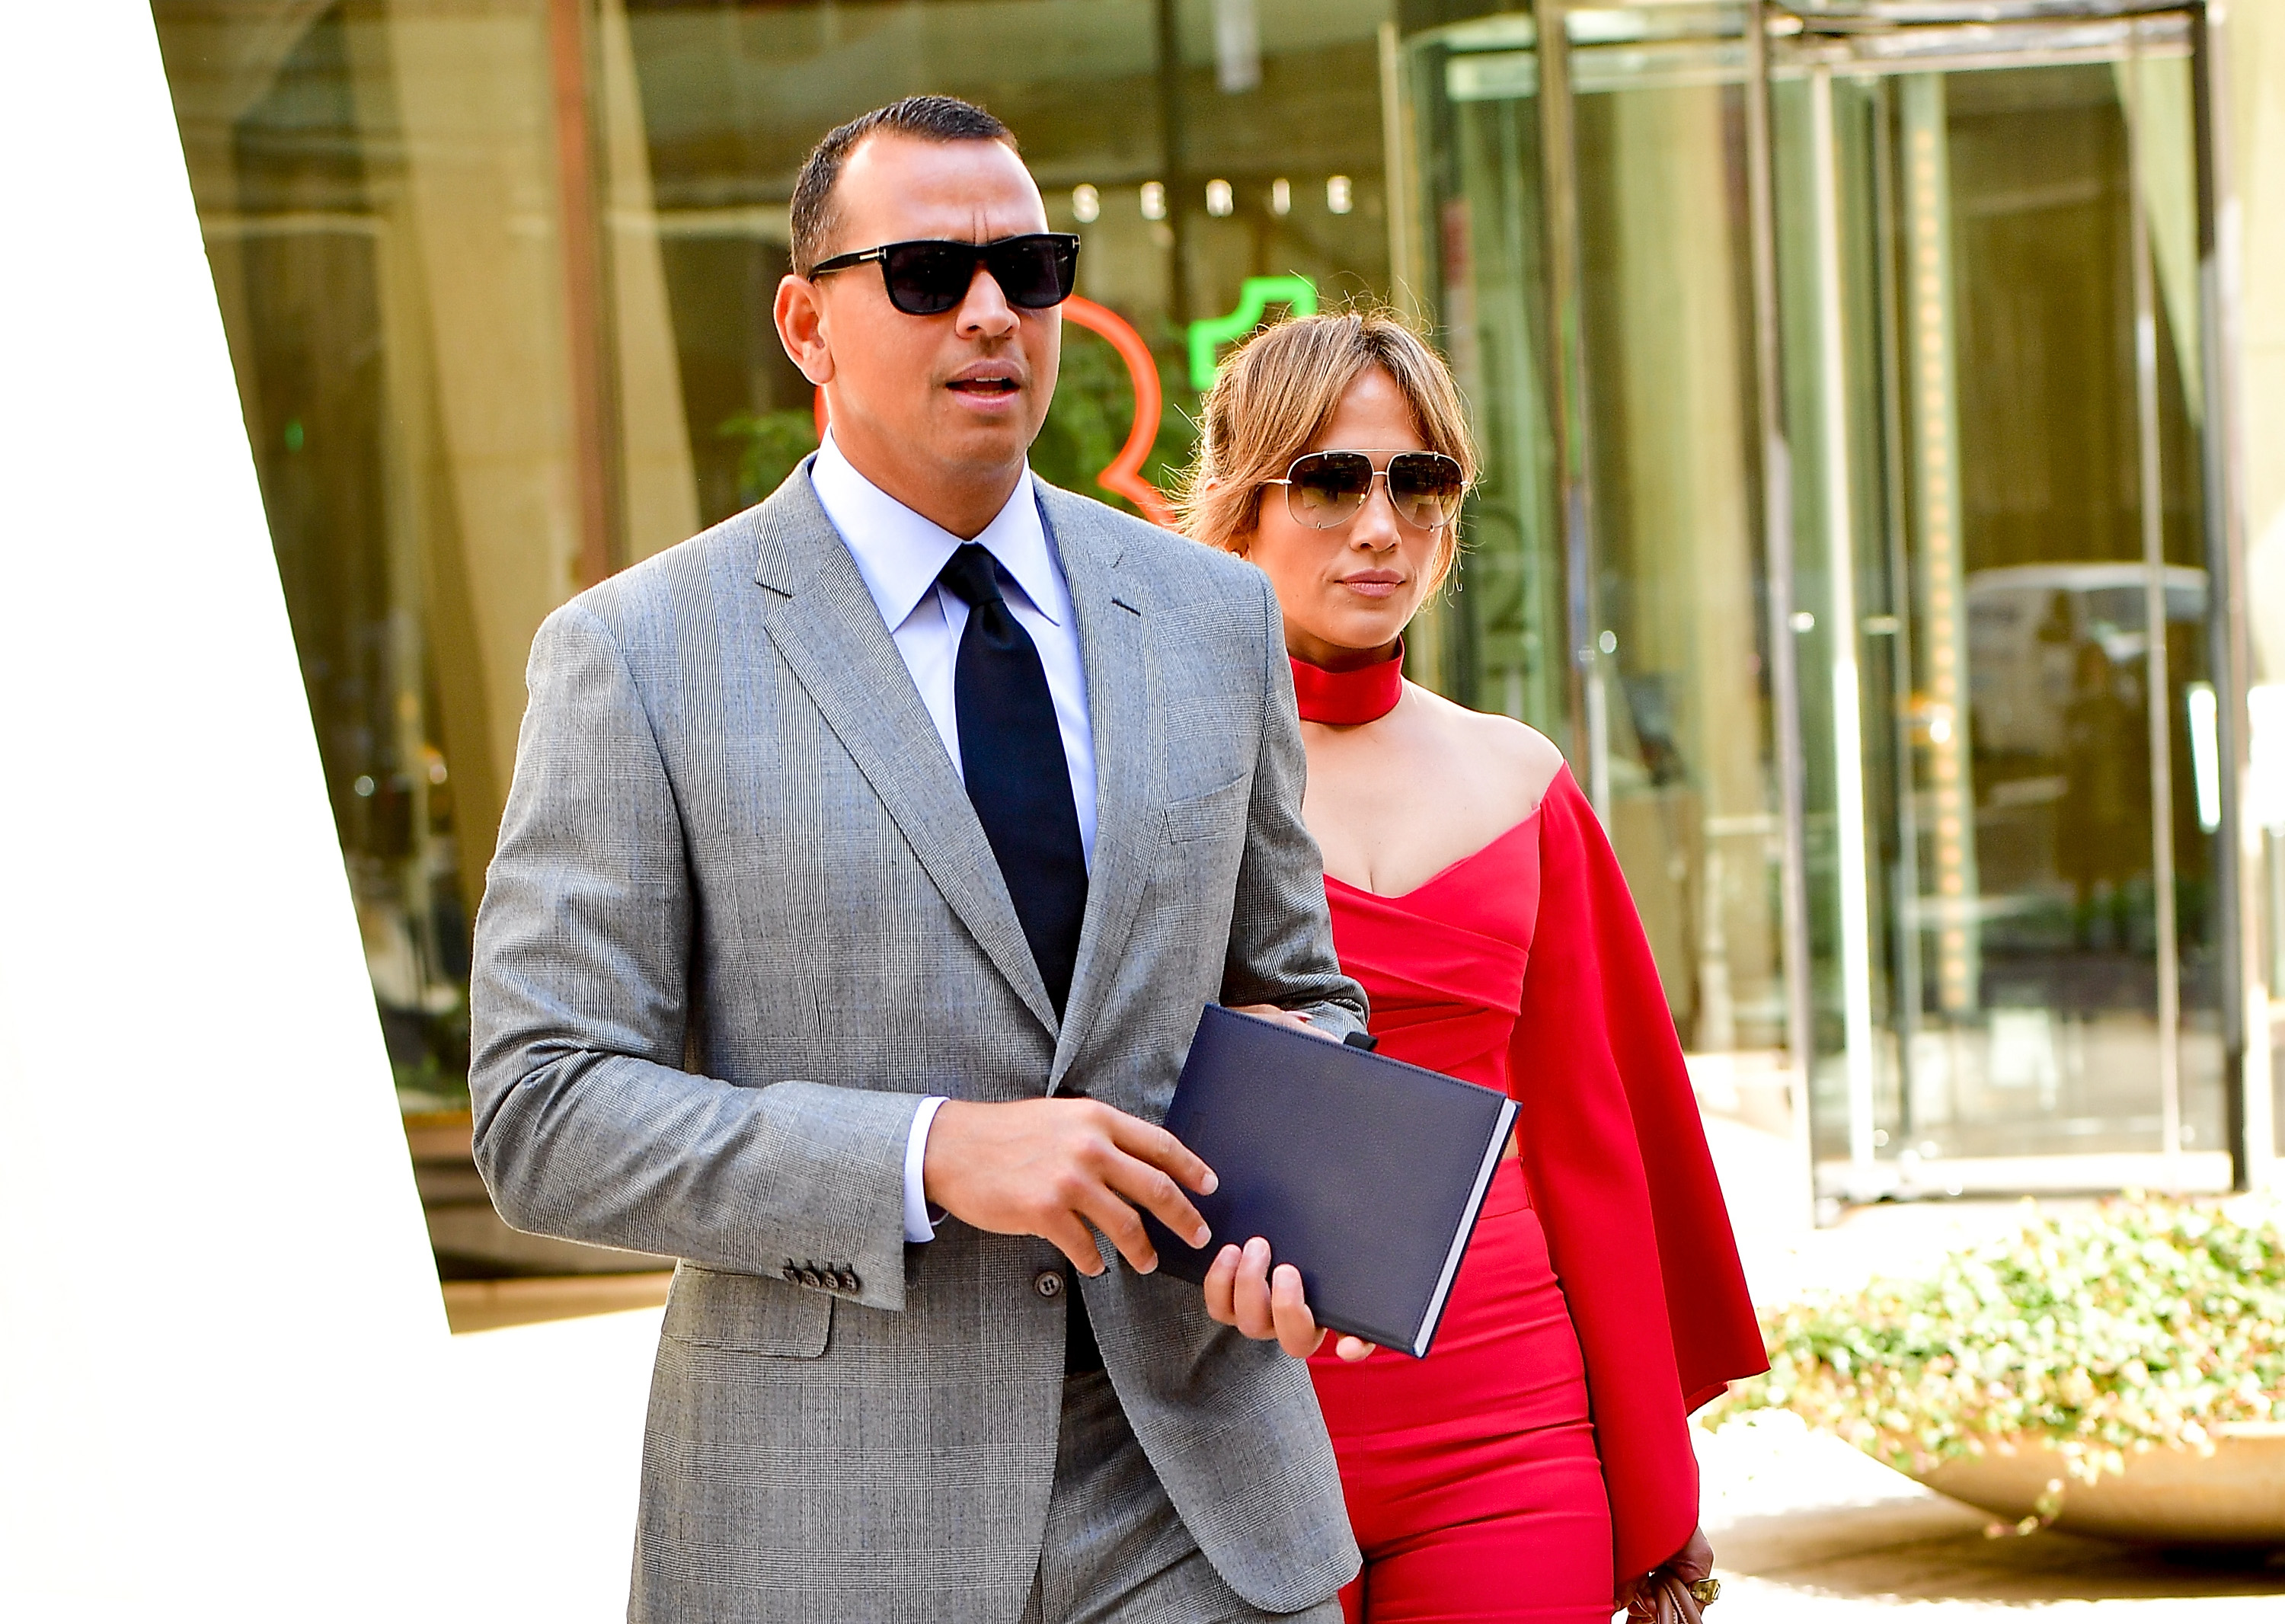 NEW YORK, NY - APRIL 03:  Alex Rodriguez and Jennifer Lopez leave the Solow Building on April 3, 2017 in New York City.  (Photo by James Devaney/GC Images) (James Devaney—GC Images)